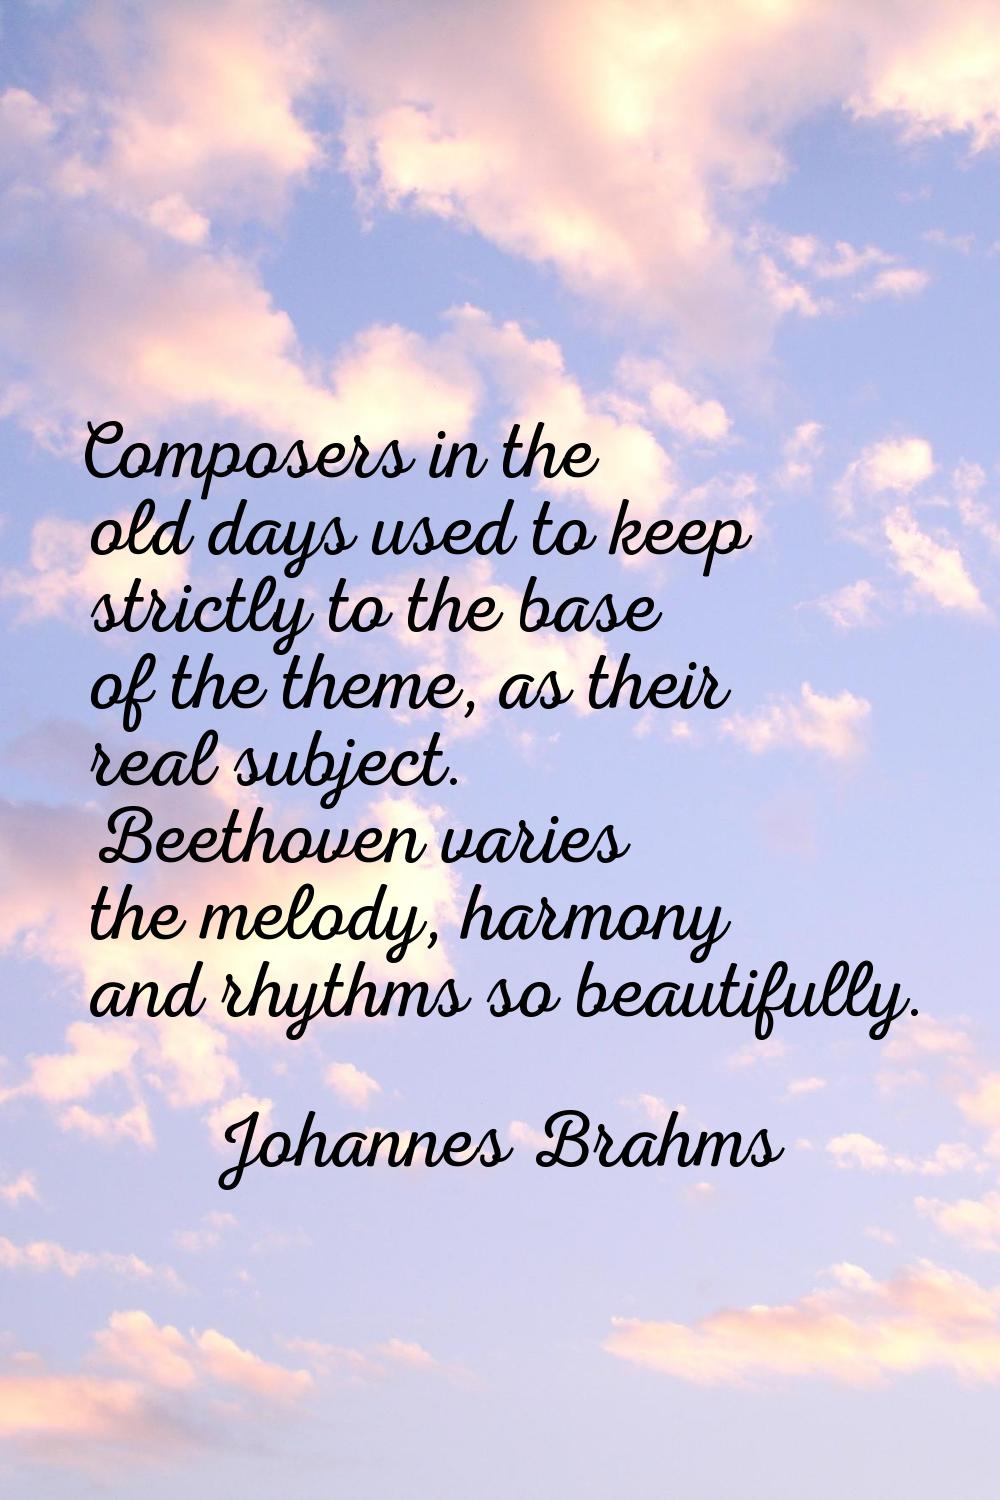 Composers in the old days used to keep strictly to the base of the theme, as their real subject. Be